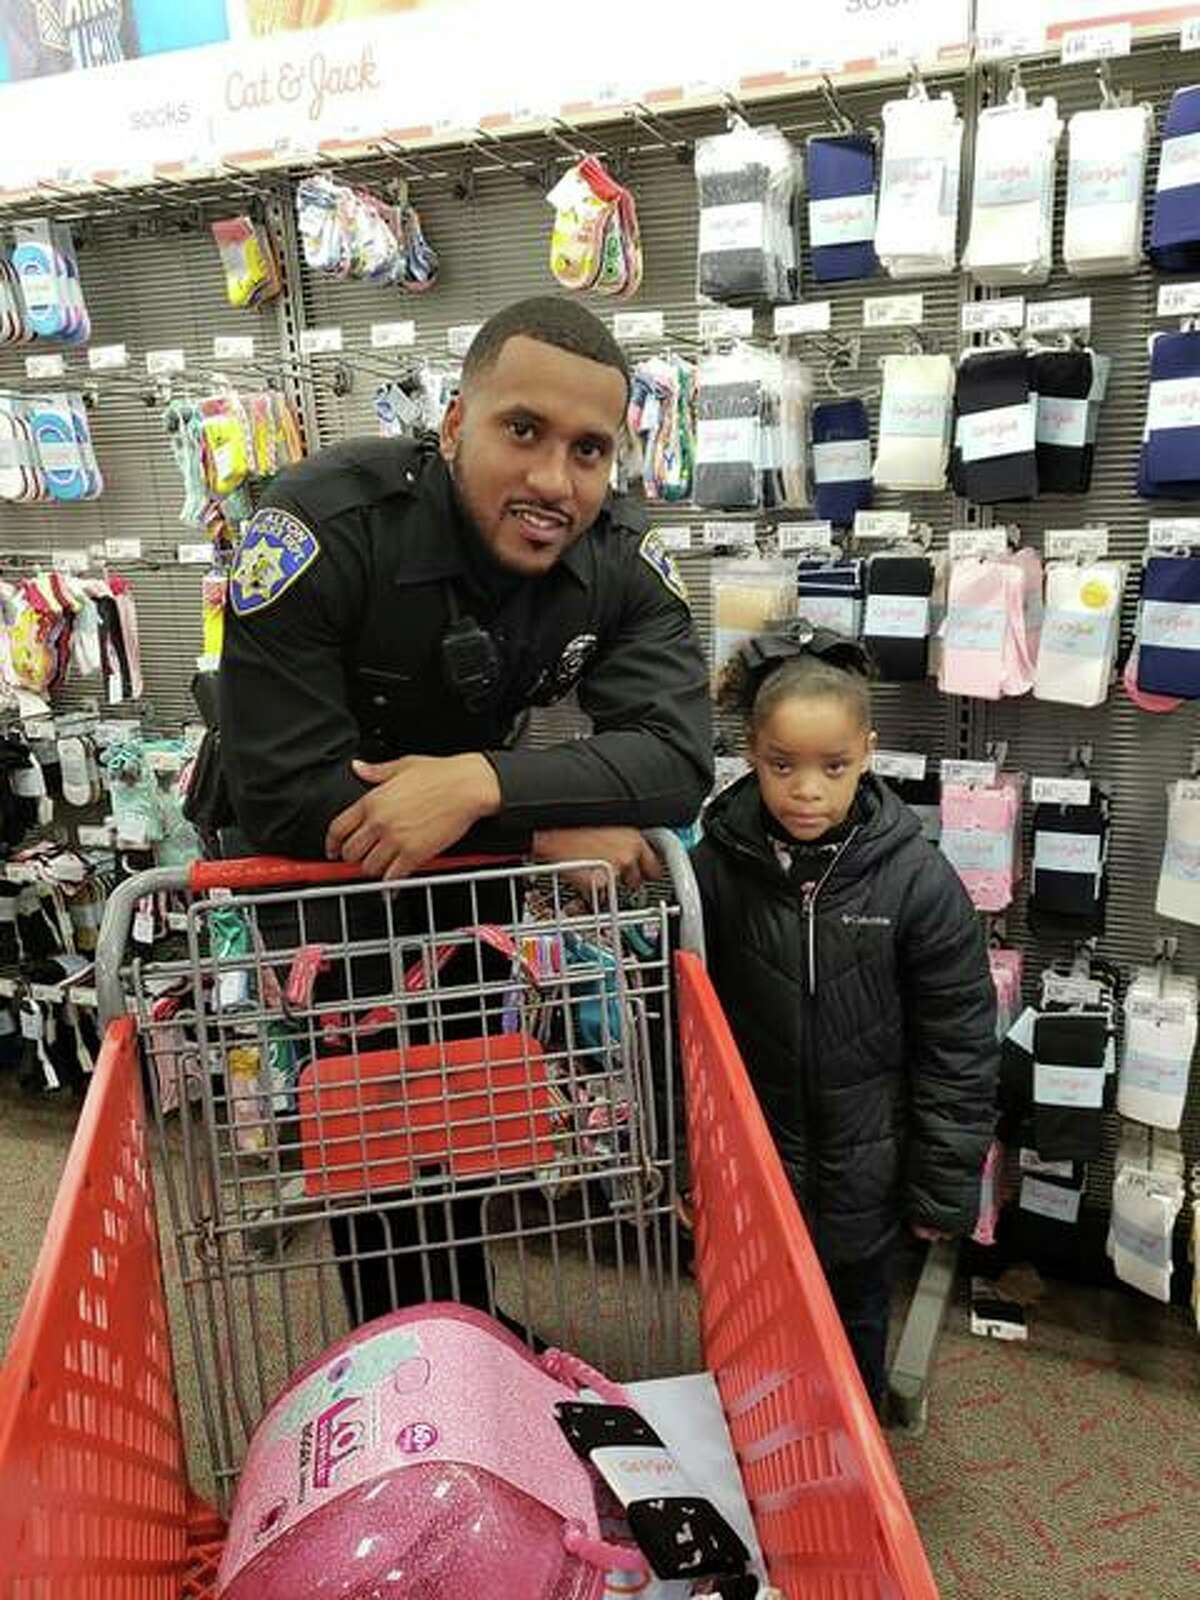 Alton Police Department probationary patrol officer Shawn Middlebrook shops with a young Alton School District student Saturday during the Police Benevolent and Protective Association (PB&PA) Alton Unit 14’s annual Shop With A Cop outreach event.